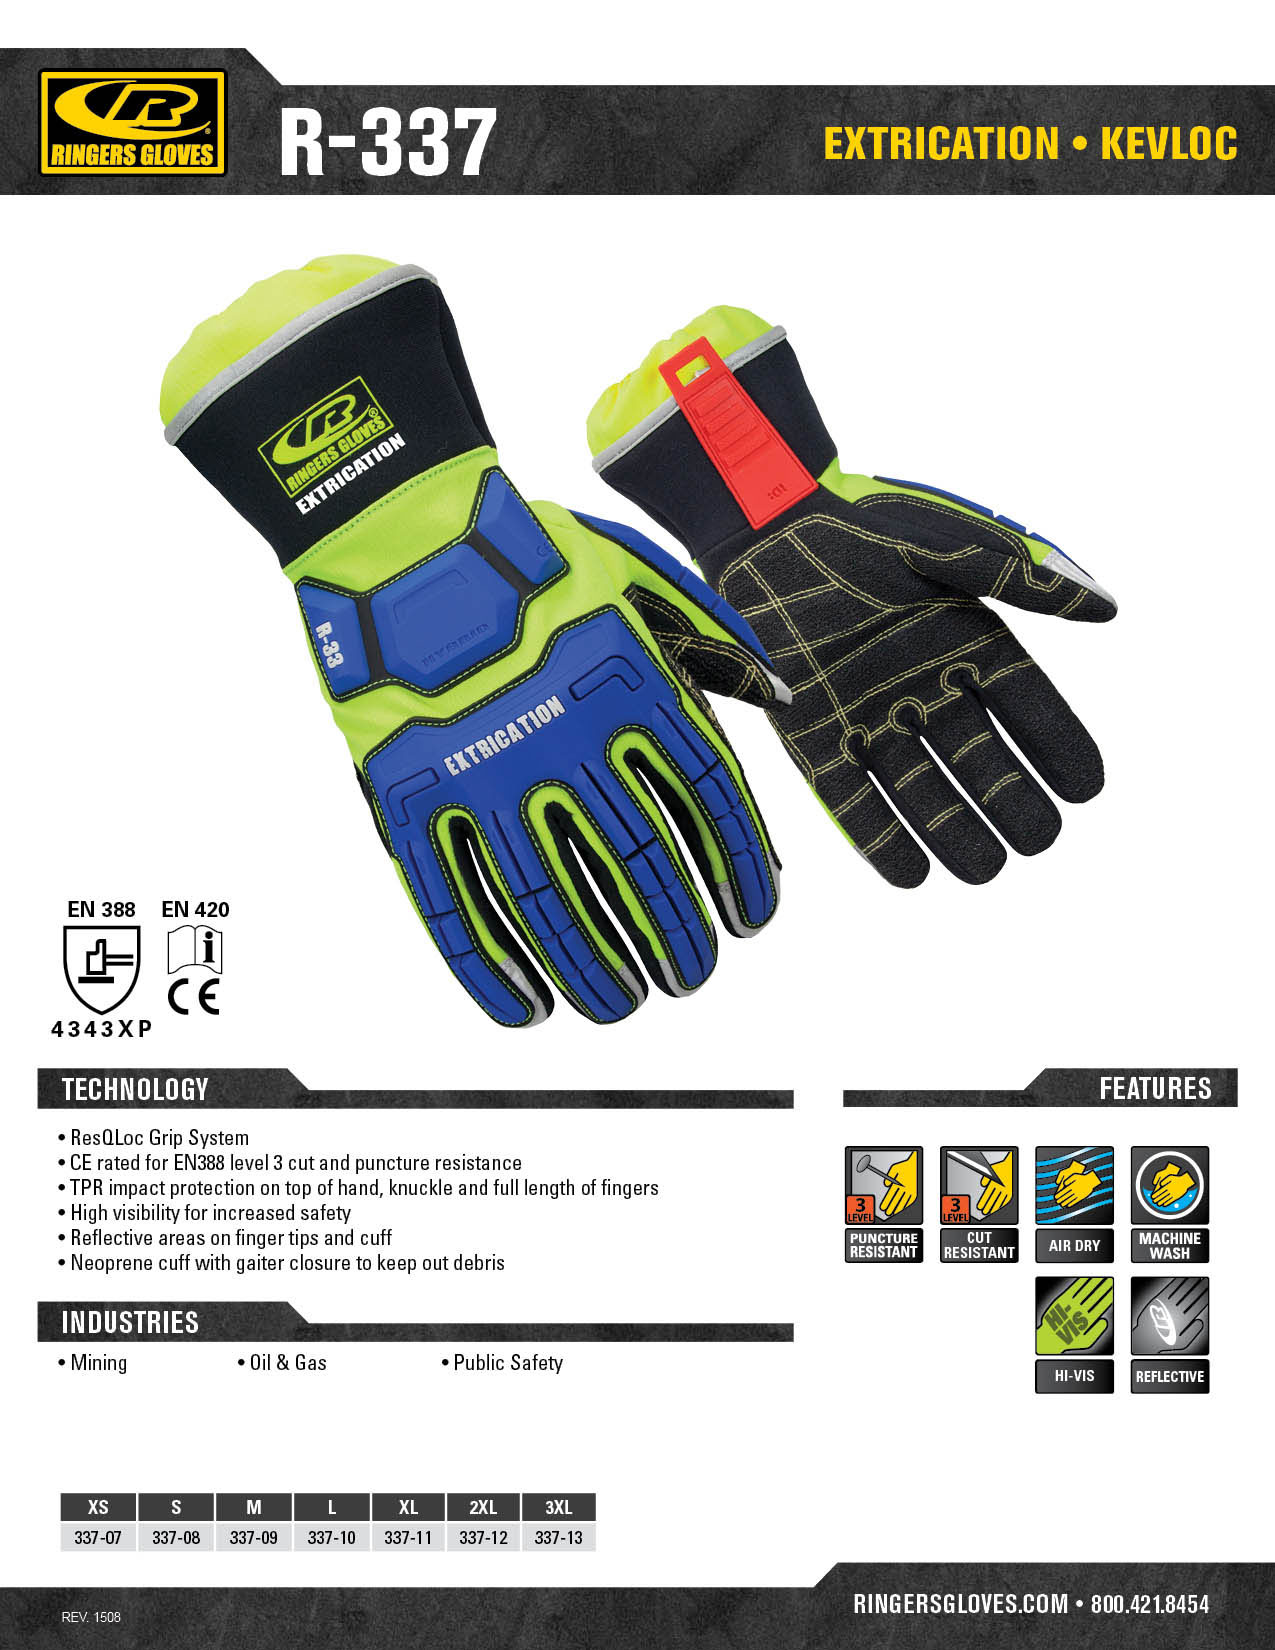 Ringers Gloves 355 Rope Rescue Reflective Foam Padded Gloves Size S-3XL 